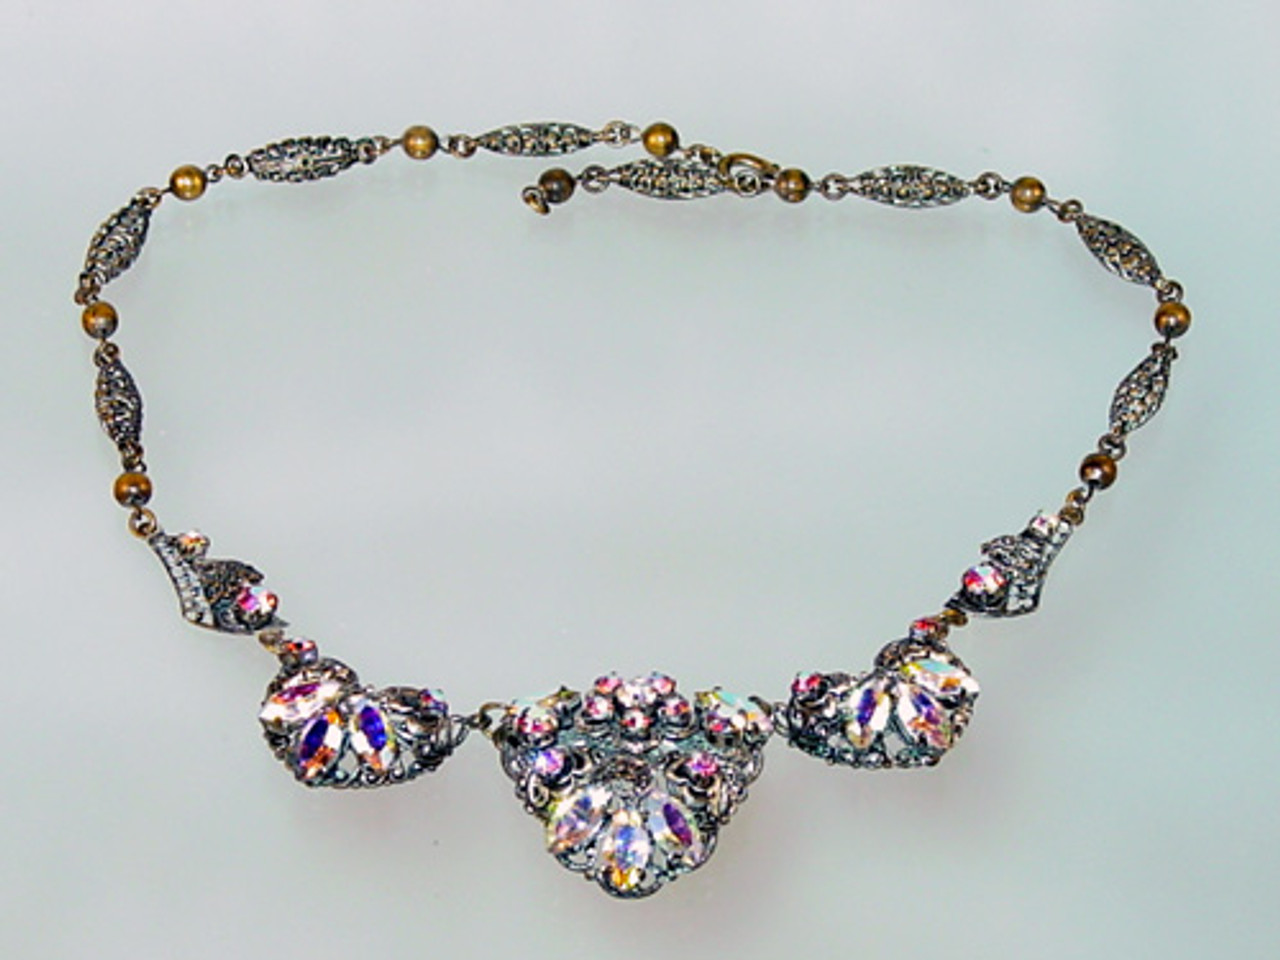 Full view of necklace